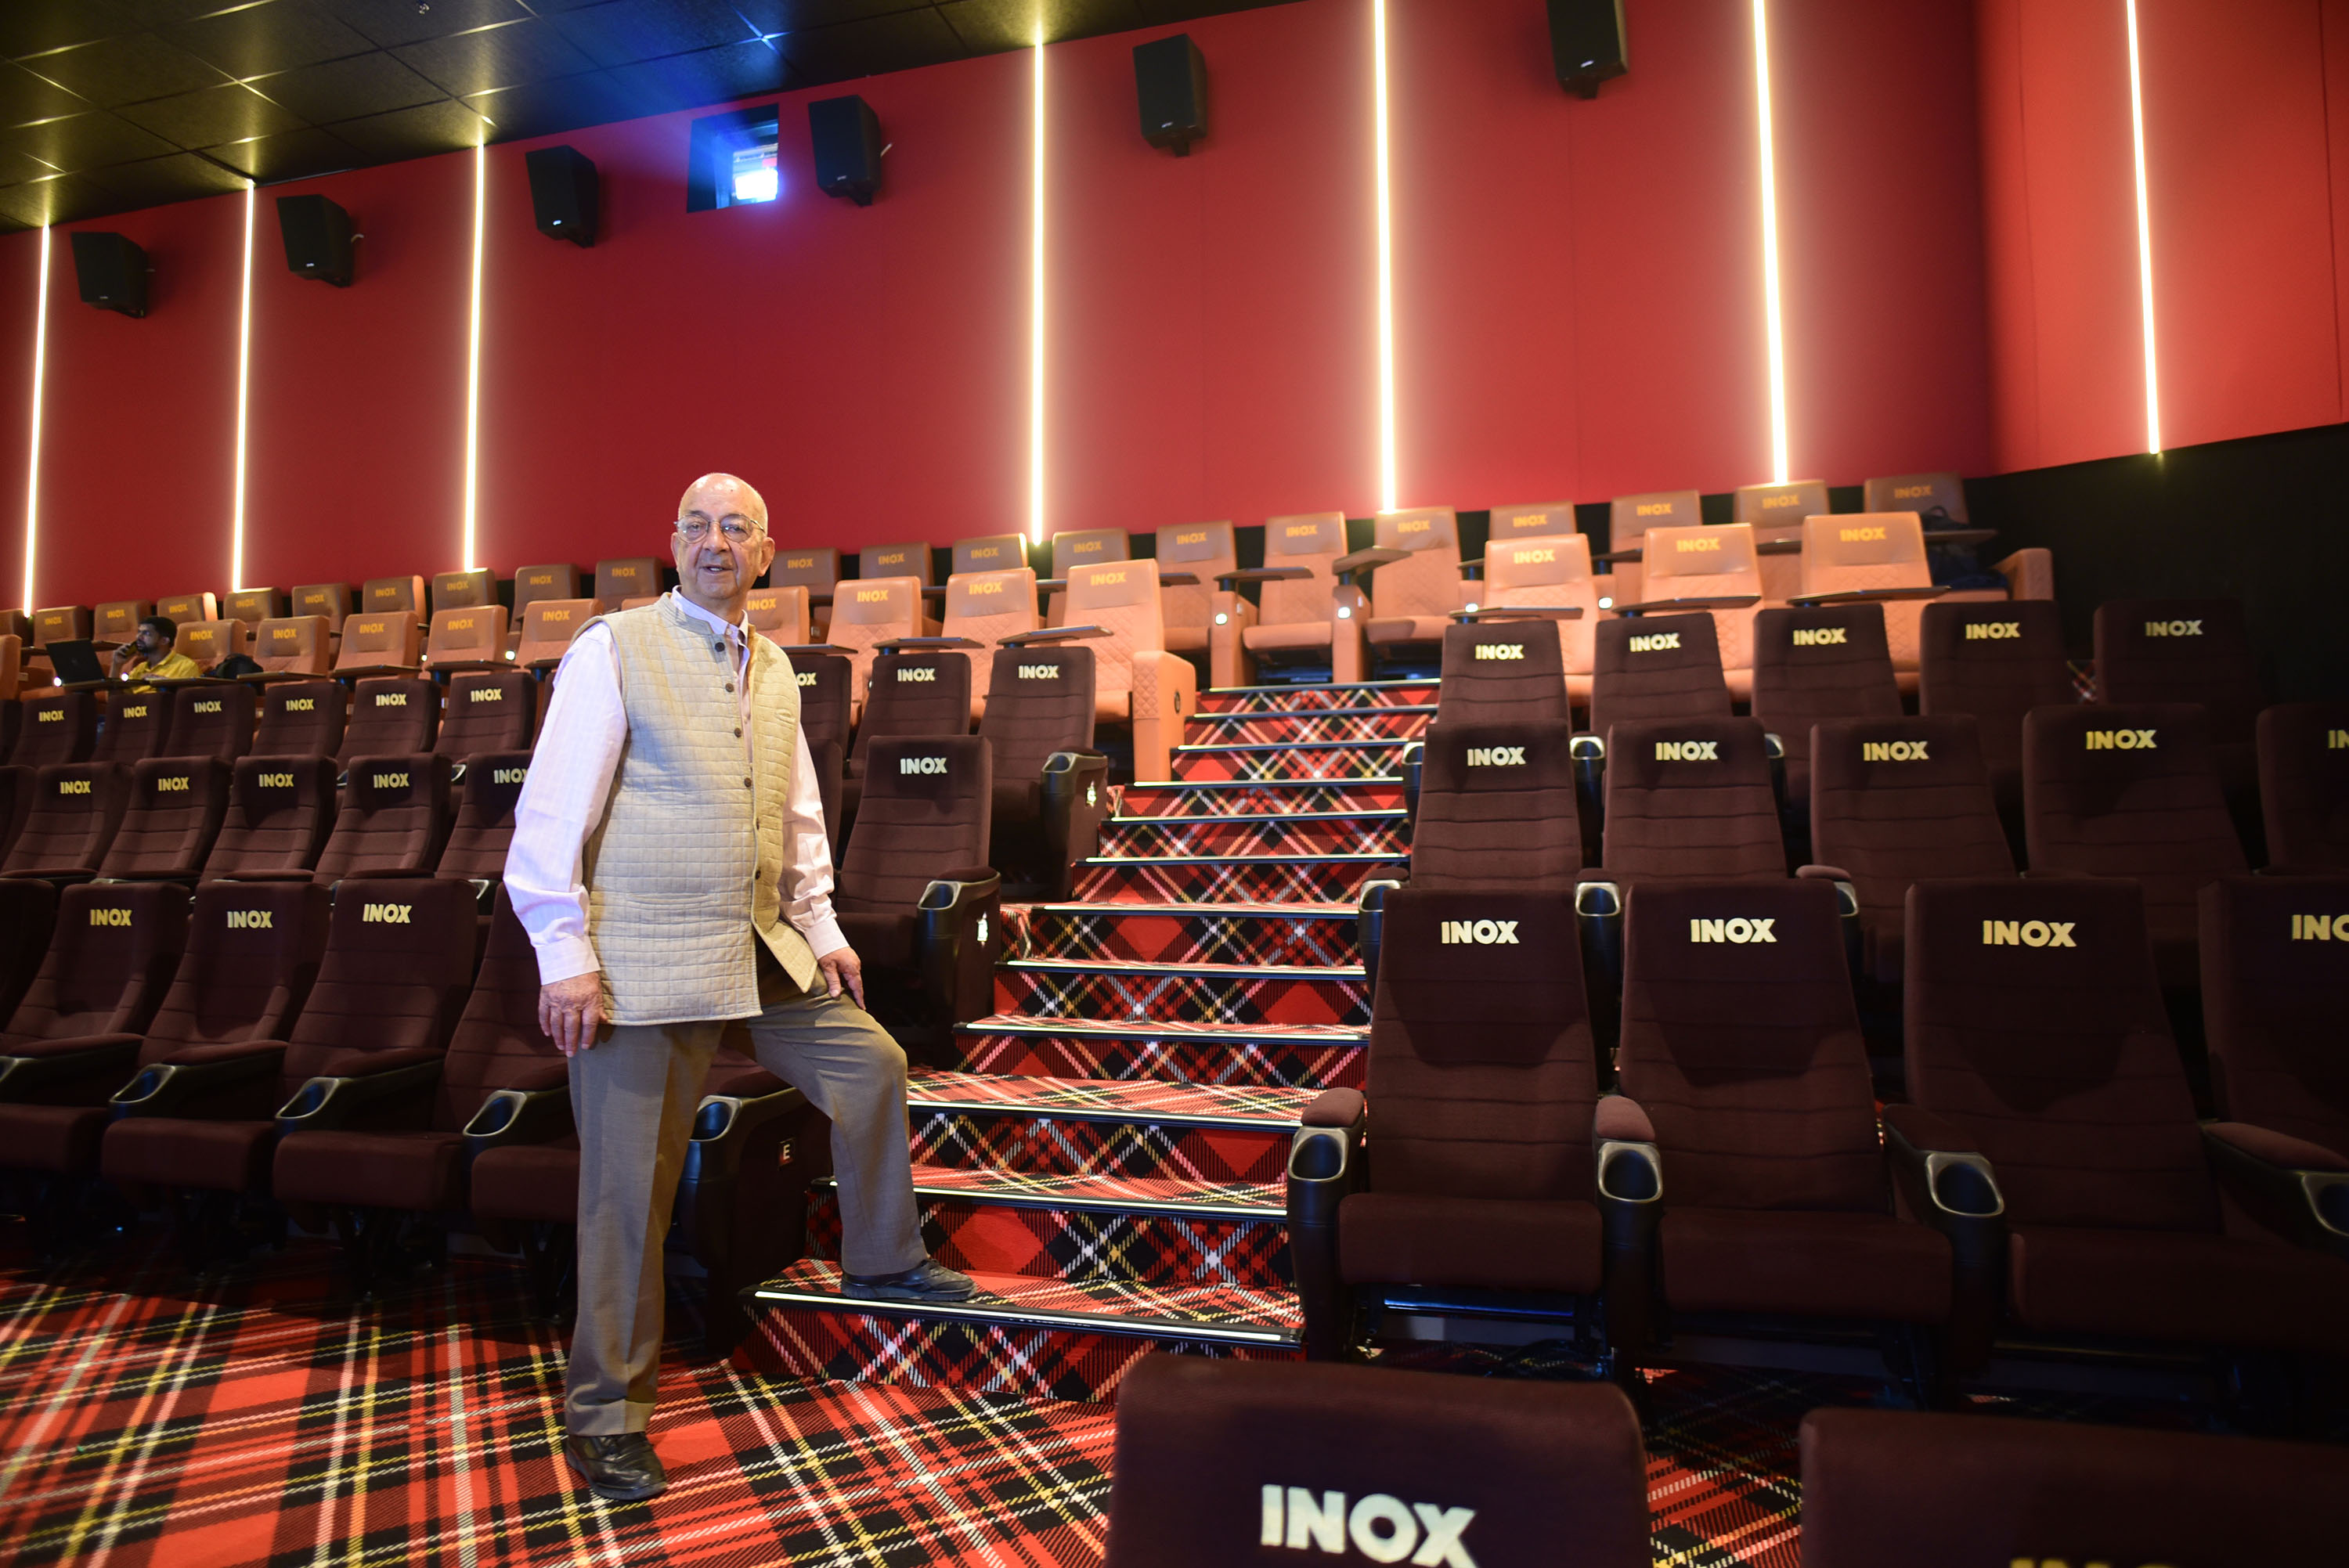 As Kashmir gets movie theatre after 32 years, owner of Srinagar's first multiplex hopes to revive 'Broadway' experience